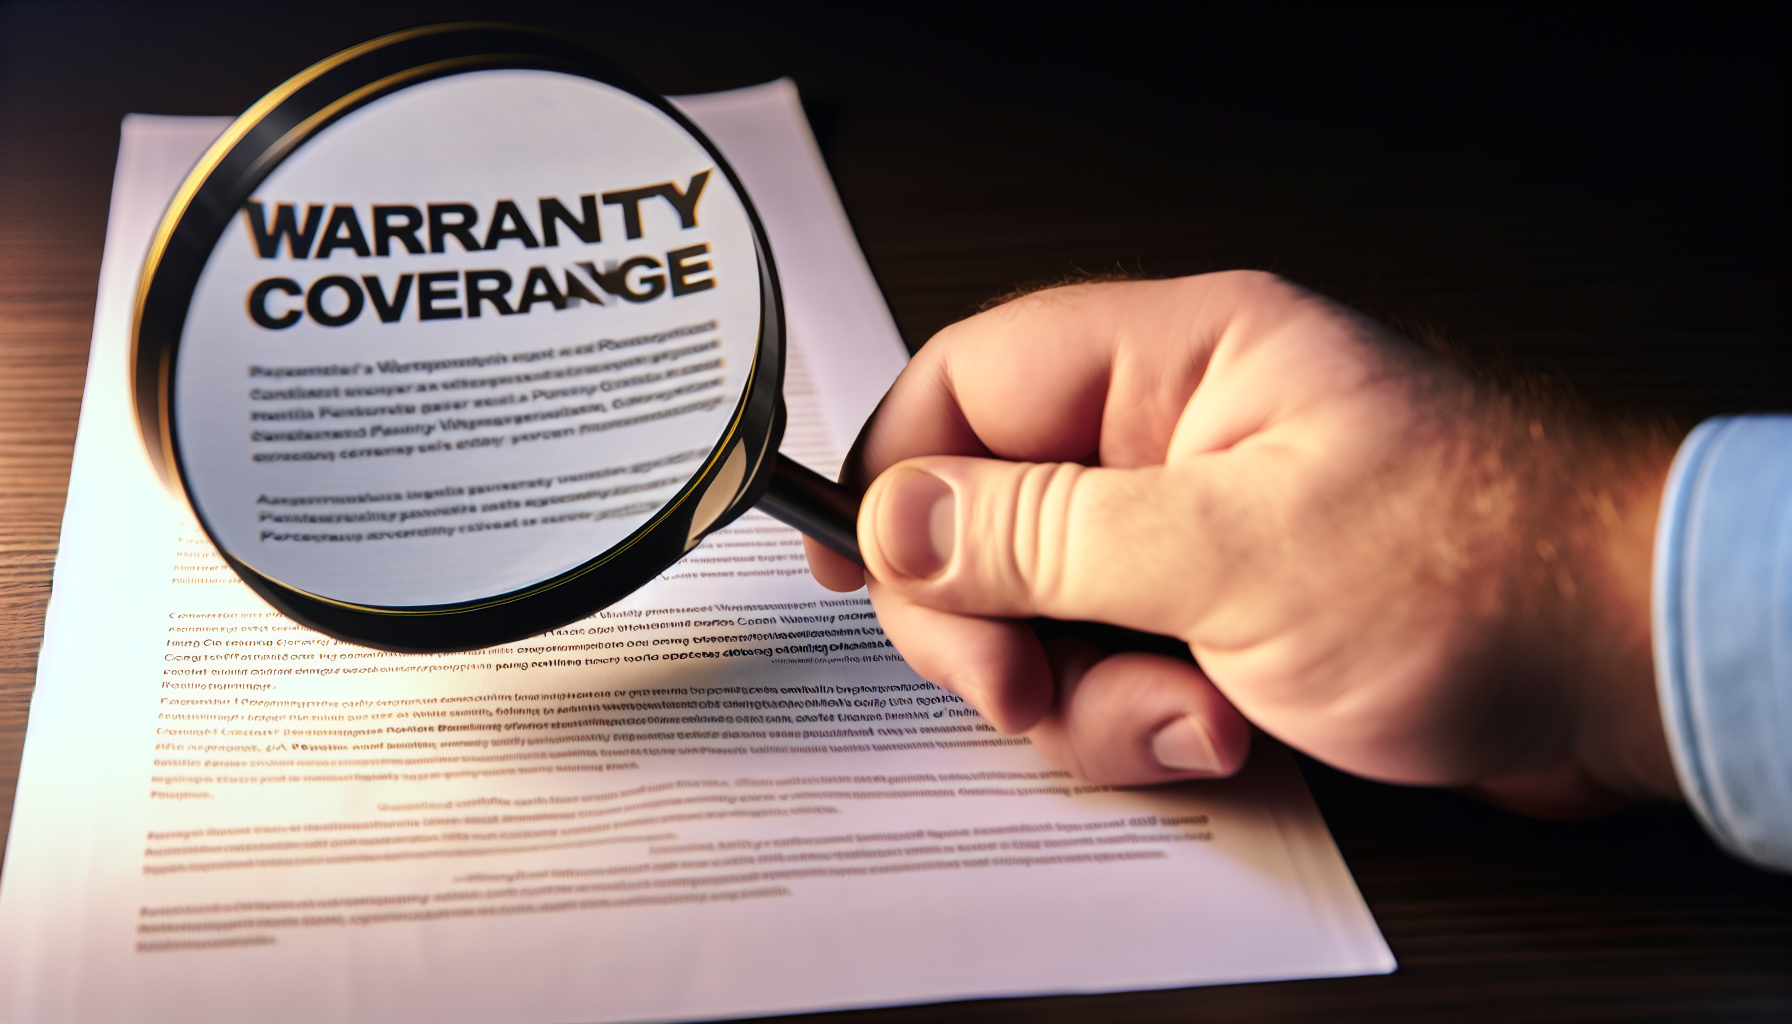 A magnifying glass over a warranty coverage document